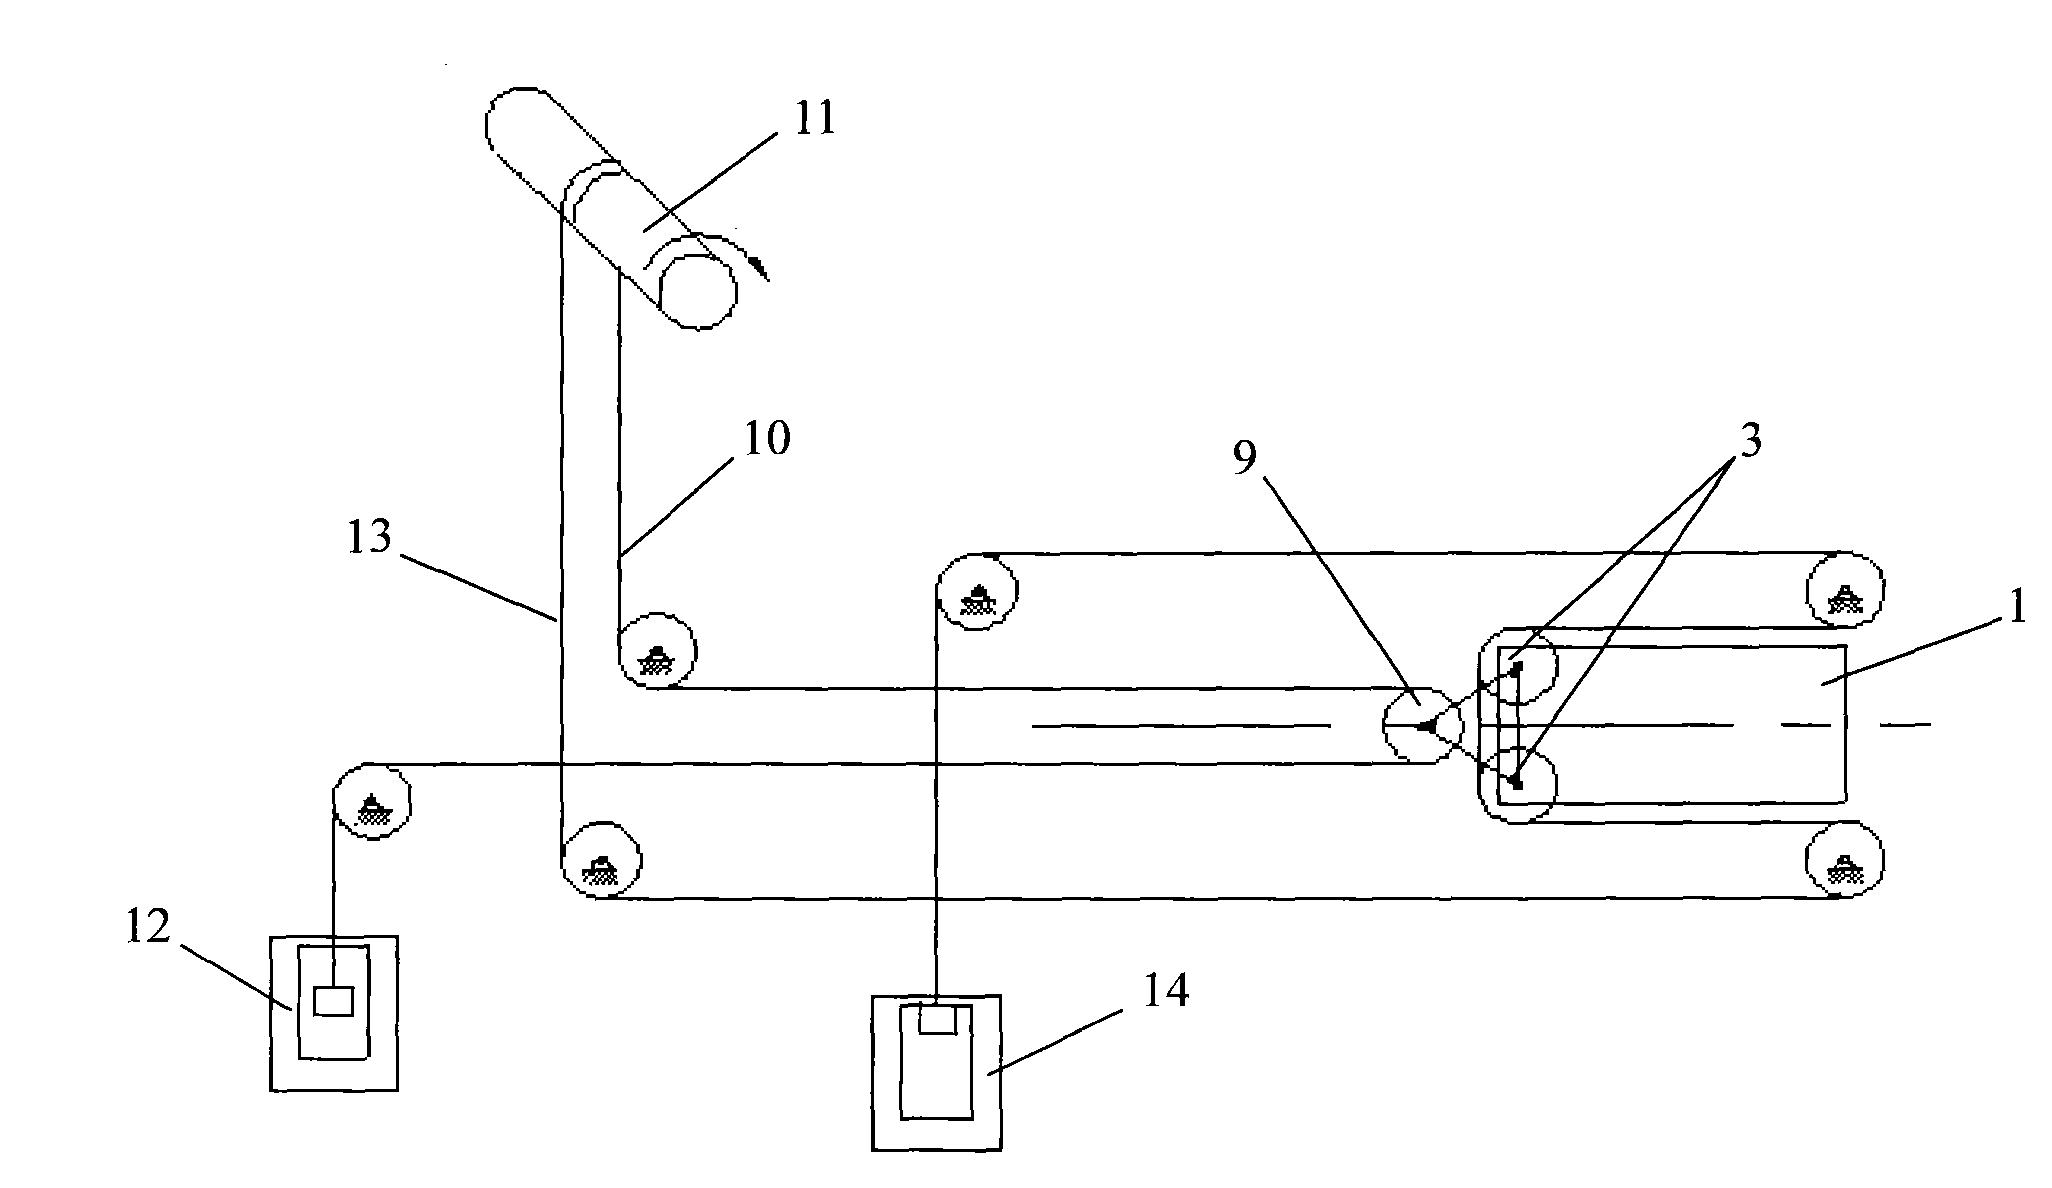 Underwater fuel conveying trolley and tipping-over device for pressurized water reactor